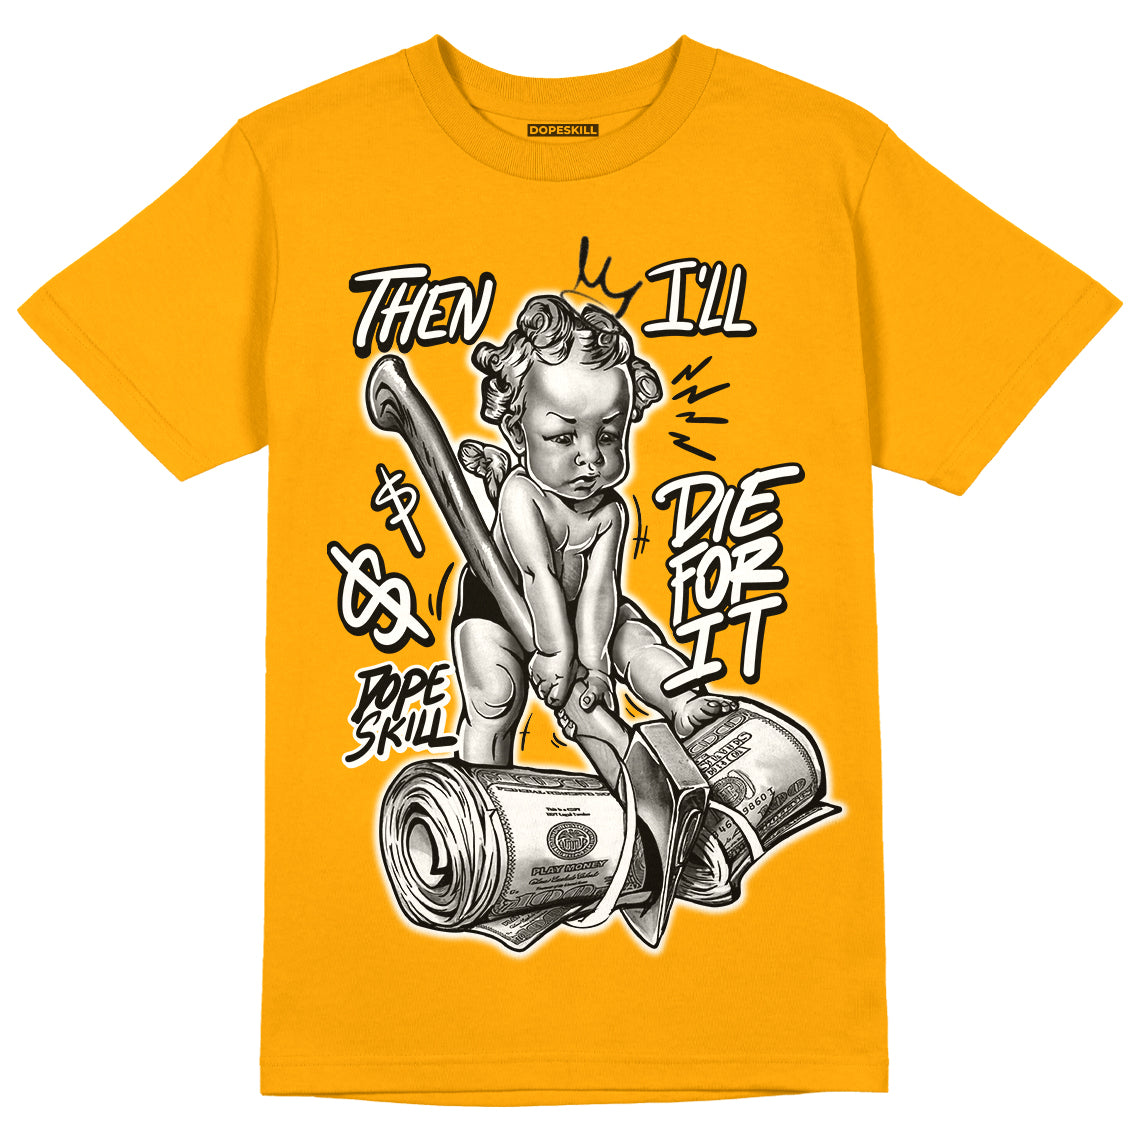 Taxi Yellow Toe 1s DopeSkill Taxi T-shirt Then I'll Die For It Graphic